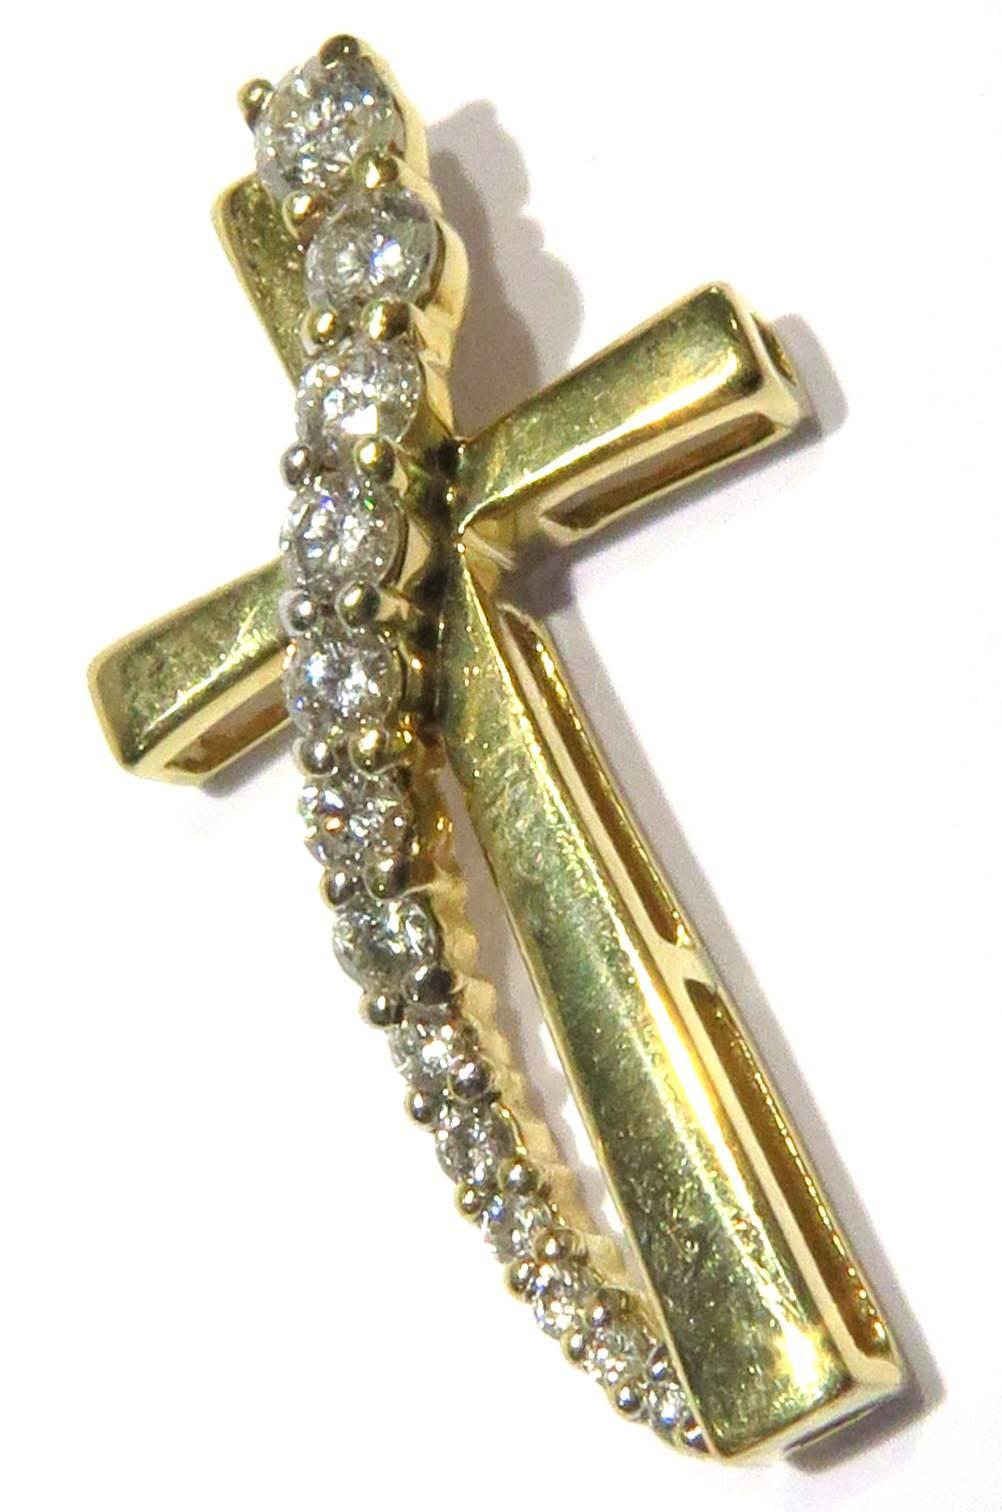 This elegant 14k yellow gold diamond cross is a perfect gift for any occasion. There are 13 prong set diamonds containing approx .30ct diamonds.
This cross measures 7/8 inch high by 1/2 inch across
This cross weighs 1.3 grams